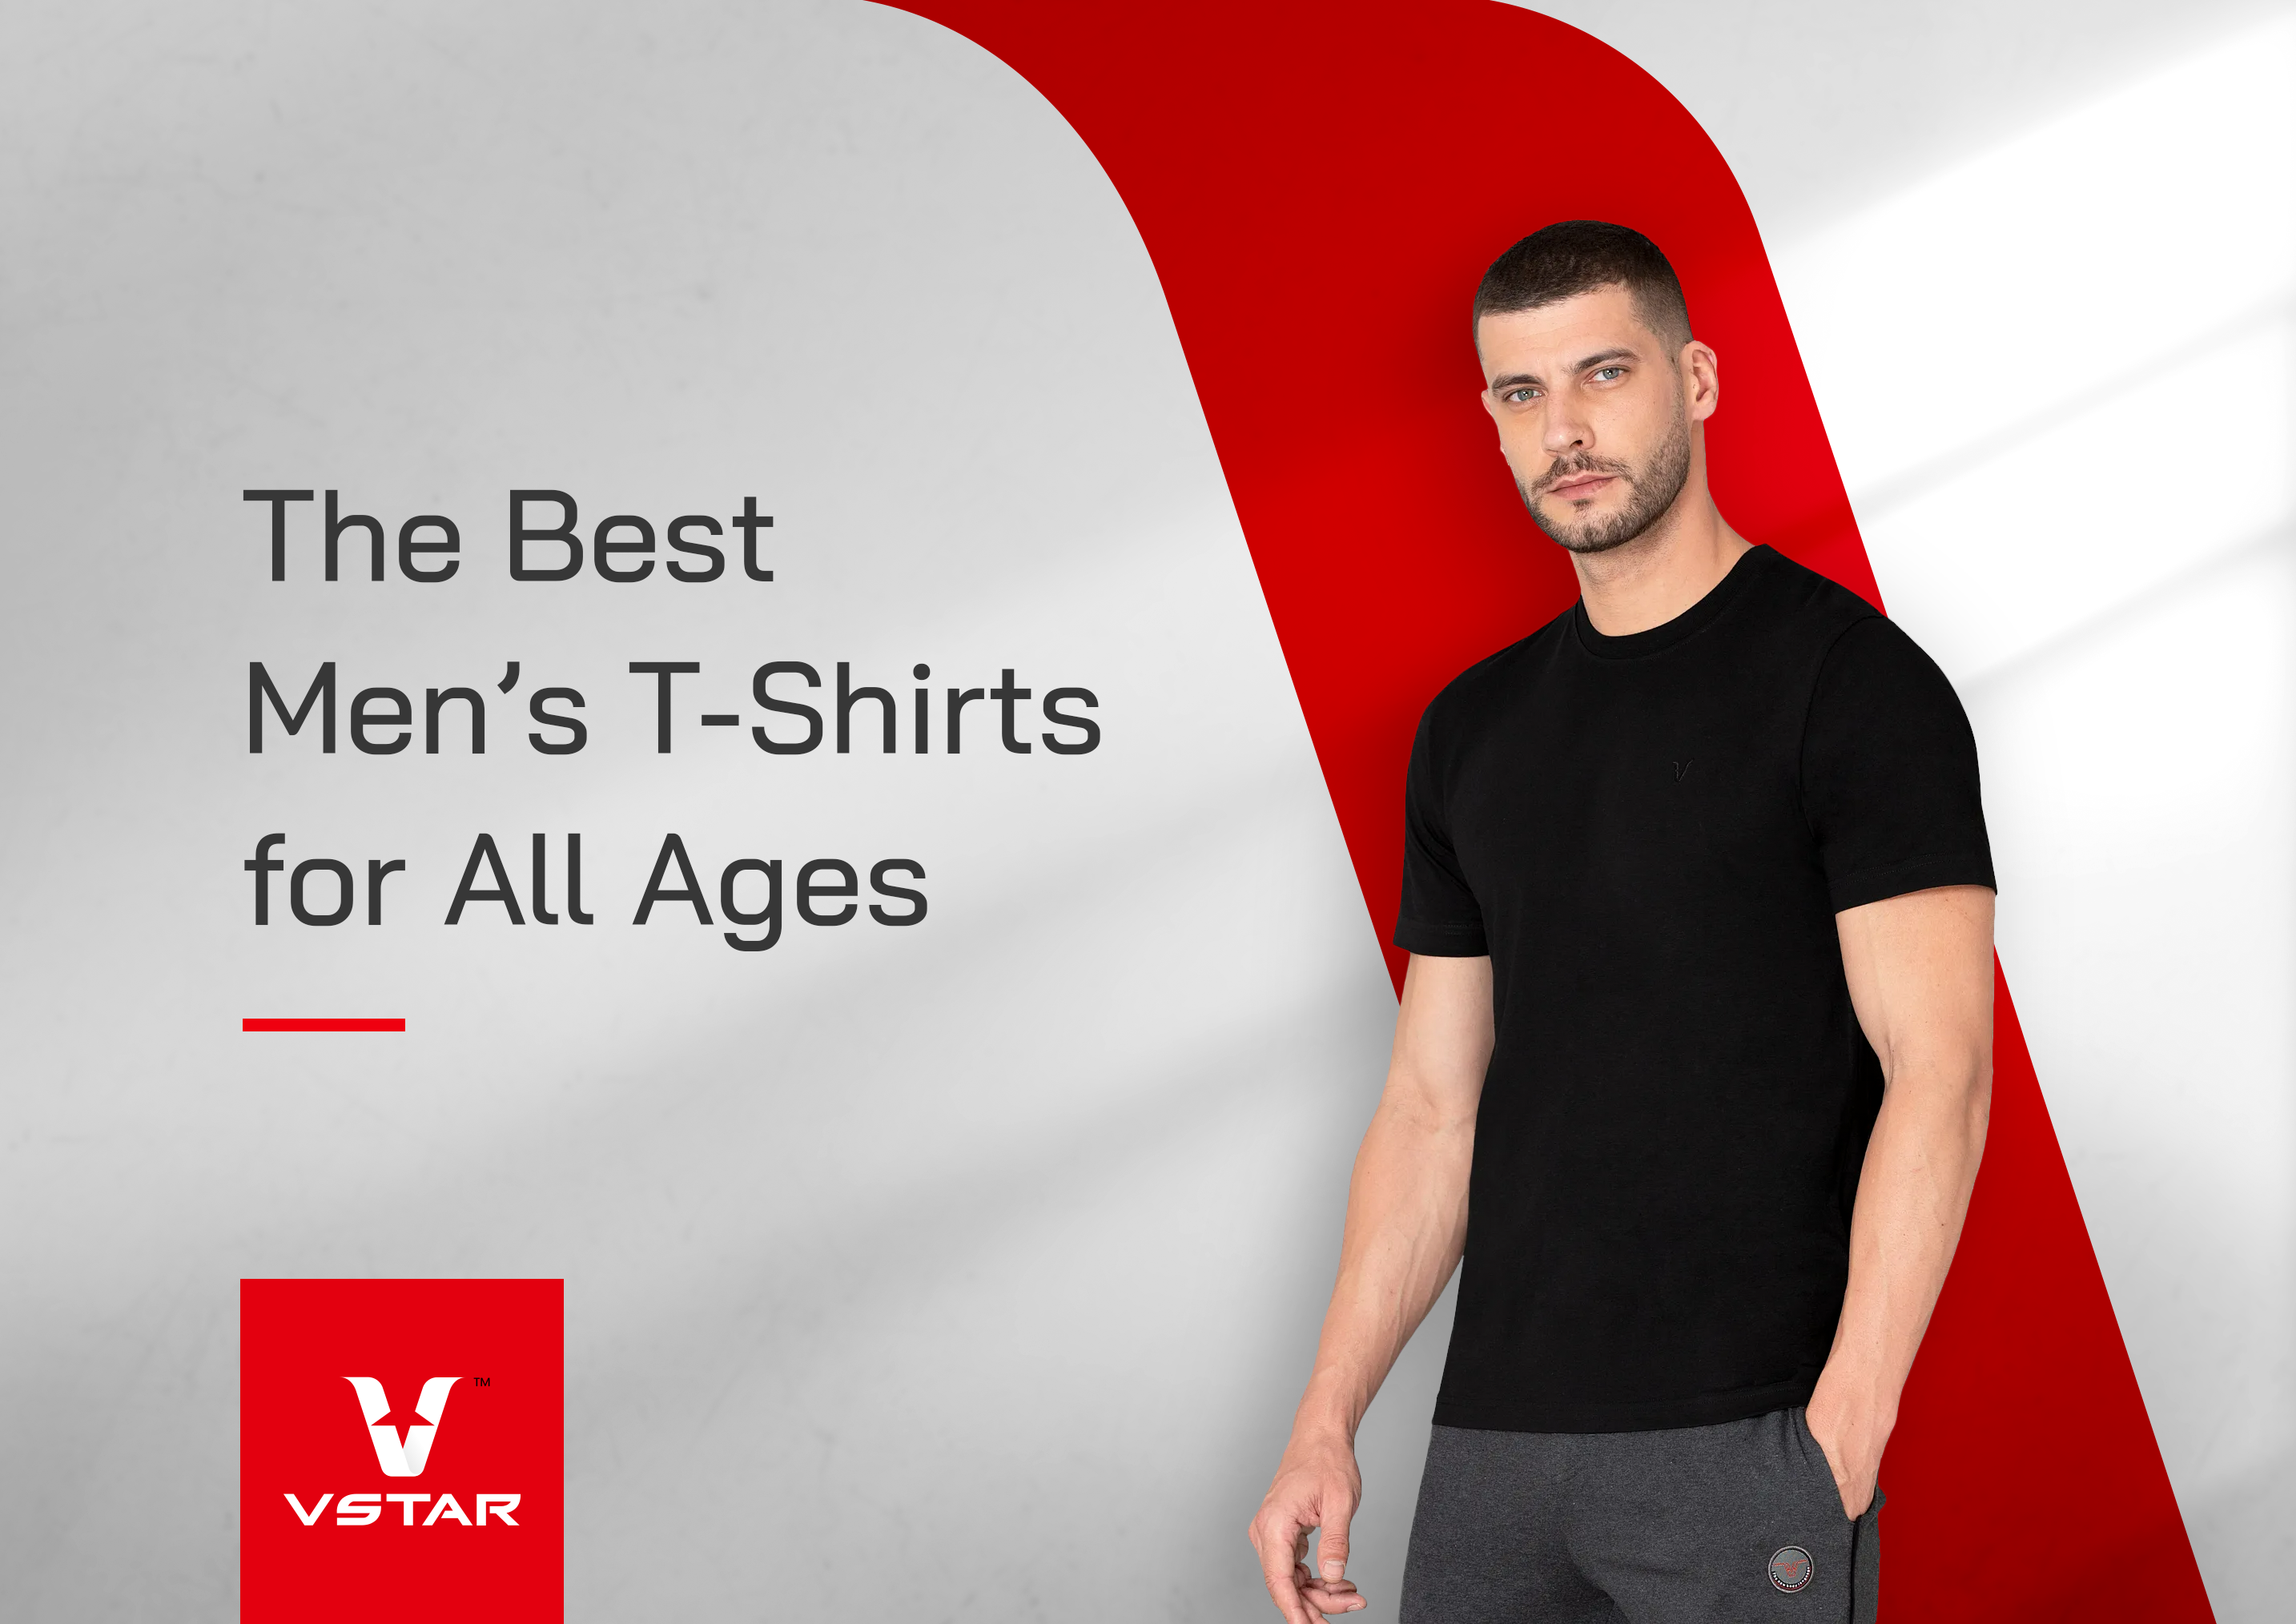 The Best Men's T-Shirts for All Ages